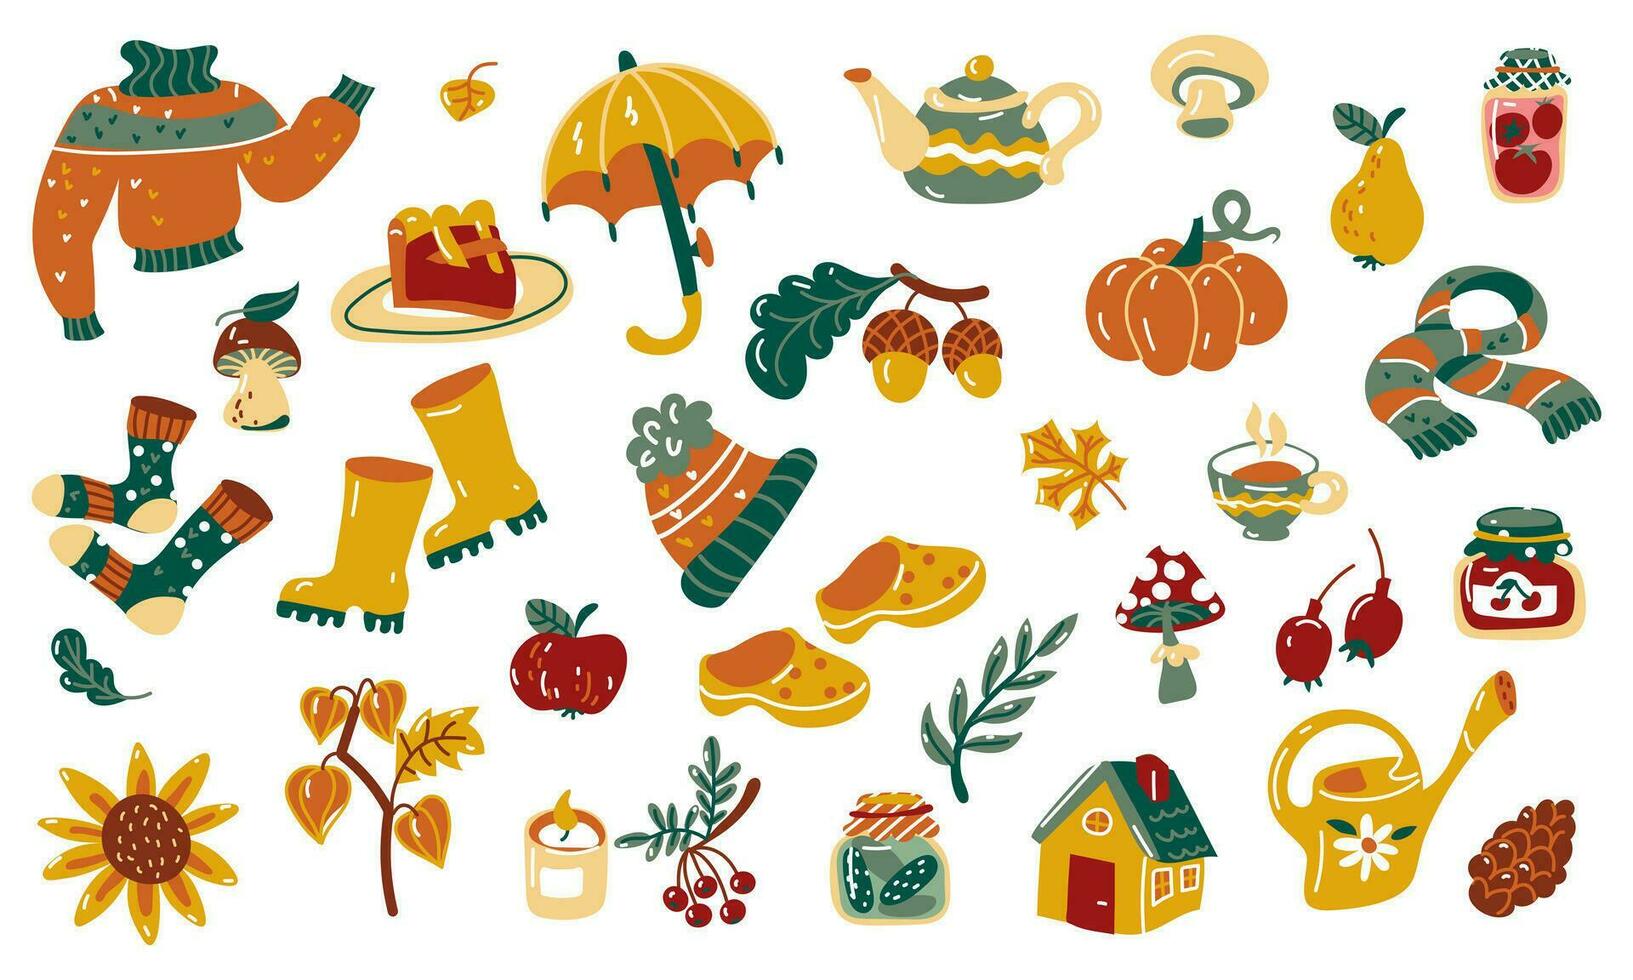 A set of autumn elements. Vector illustration of pumpkin, umbrella, pie, mushrooms, rubber boots, berries, fruits, autumn leaves and much more. A set of stickers on the autumn theme